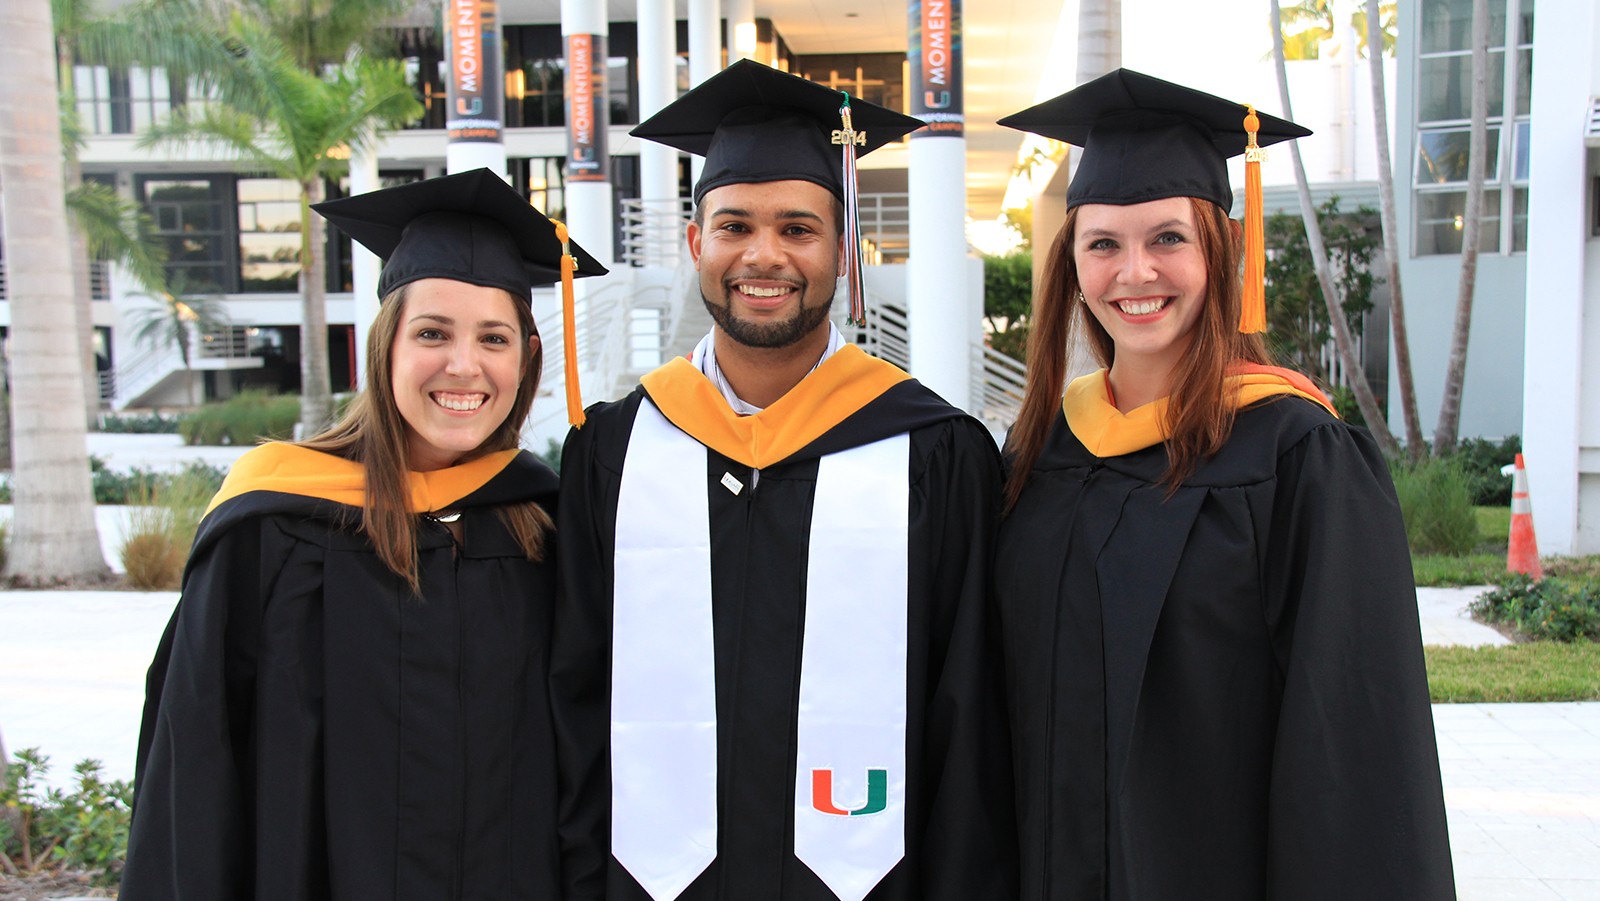 University of Miami Rosenstiel School graduates who worked with NOAA during their graduate research. From left to right: Shannon Jones, Austin Flinn, and Chloe Fleming. Image credit: NOAA